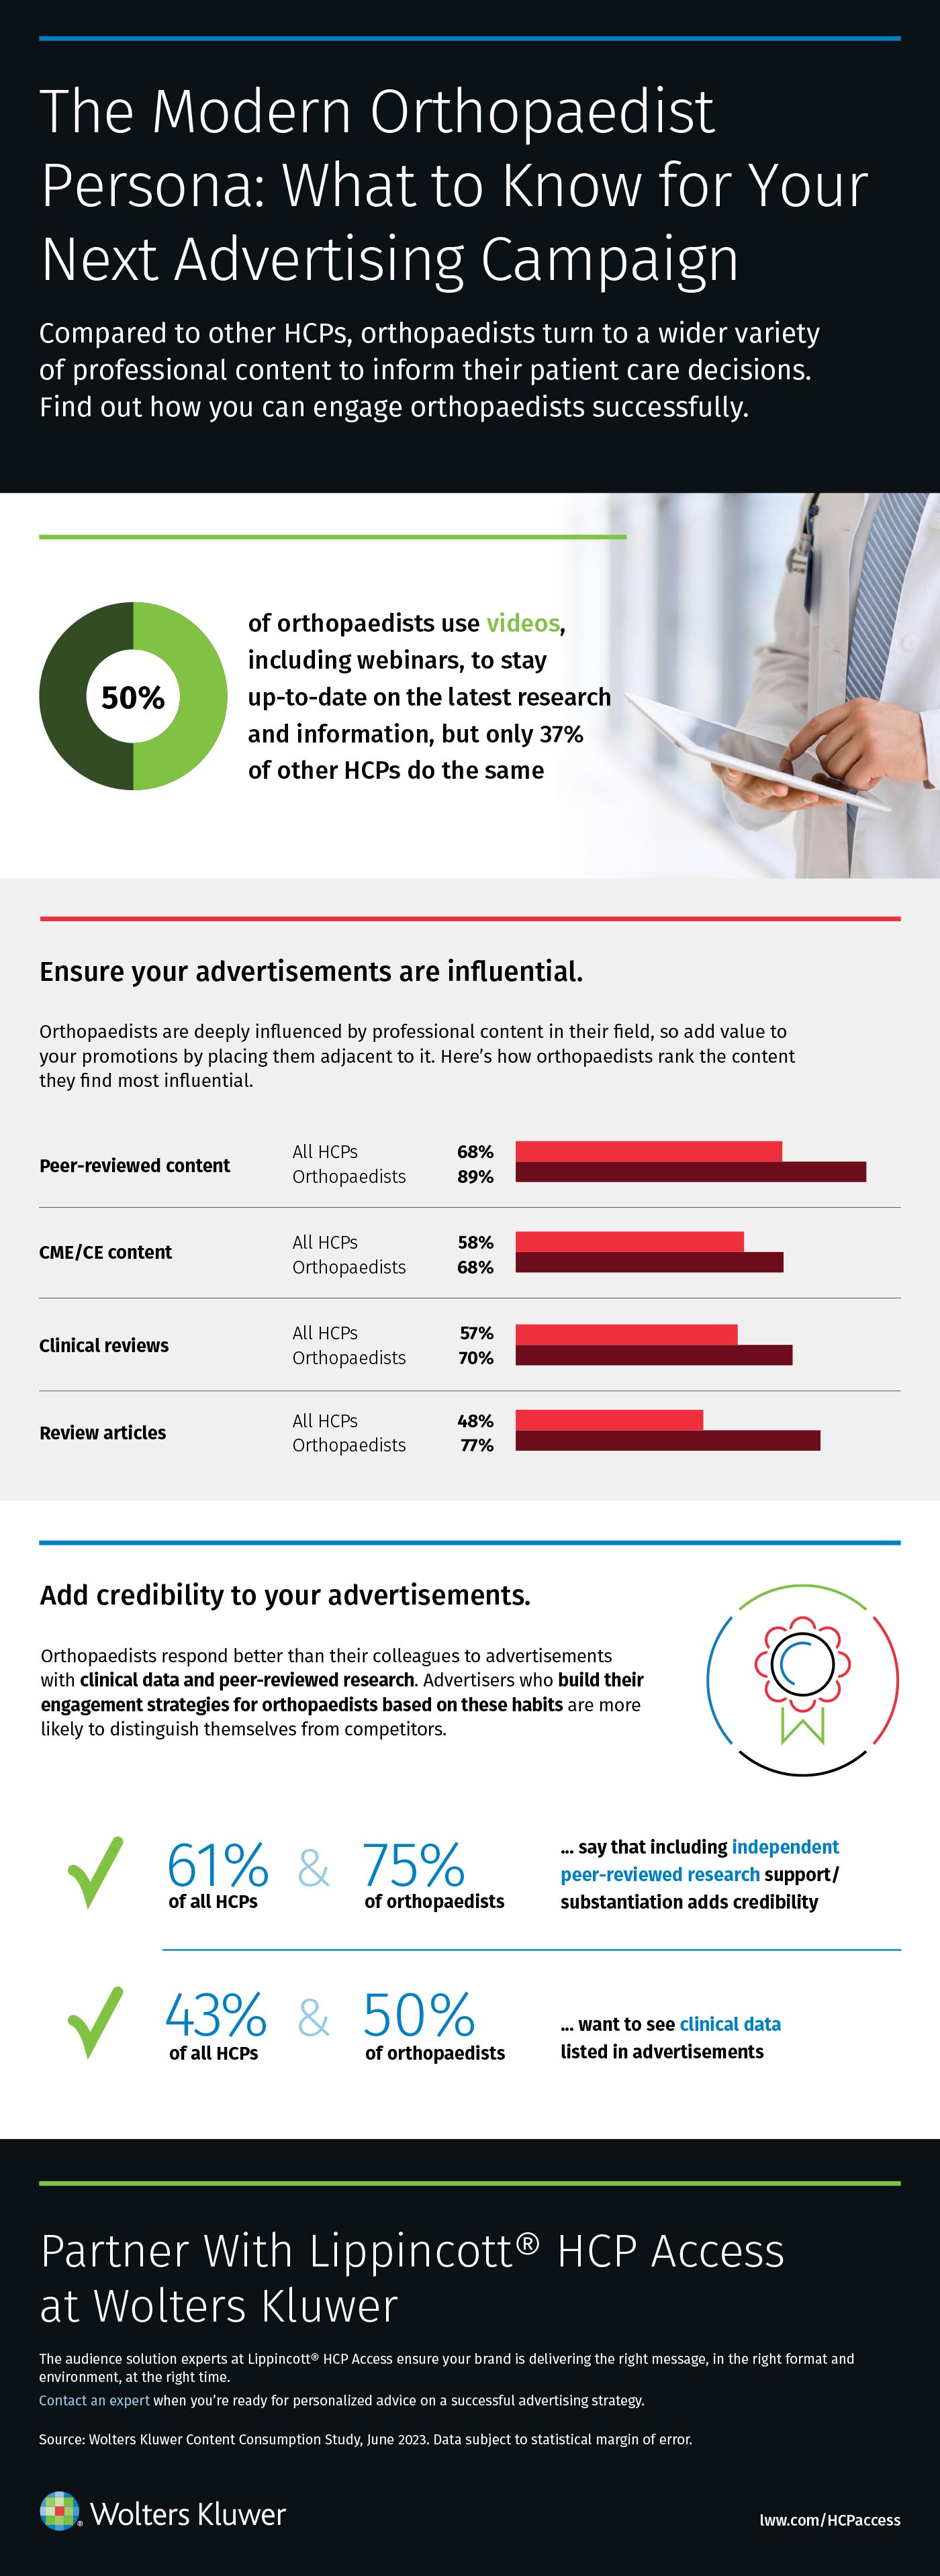 advertise to orthopaedists infographic